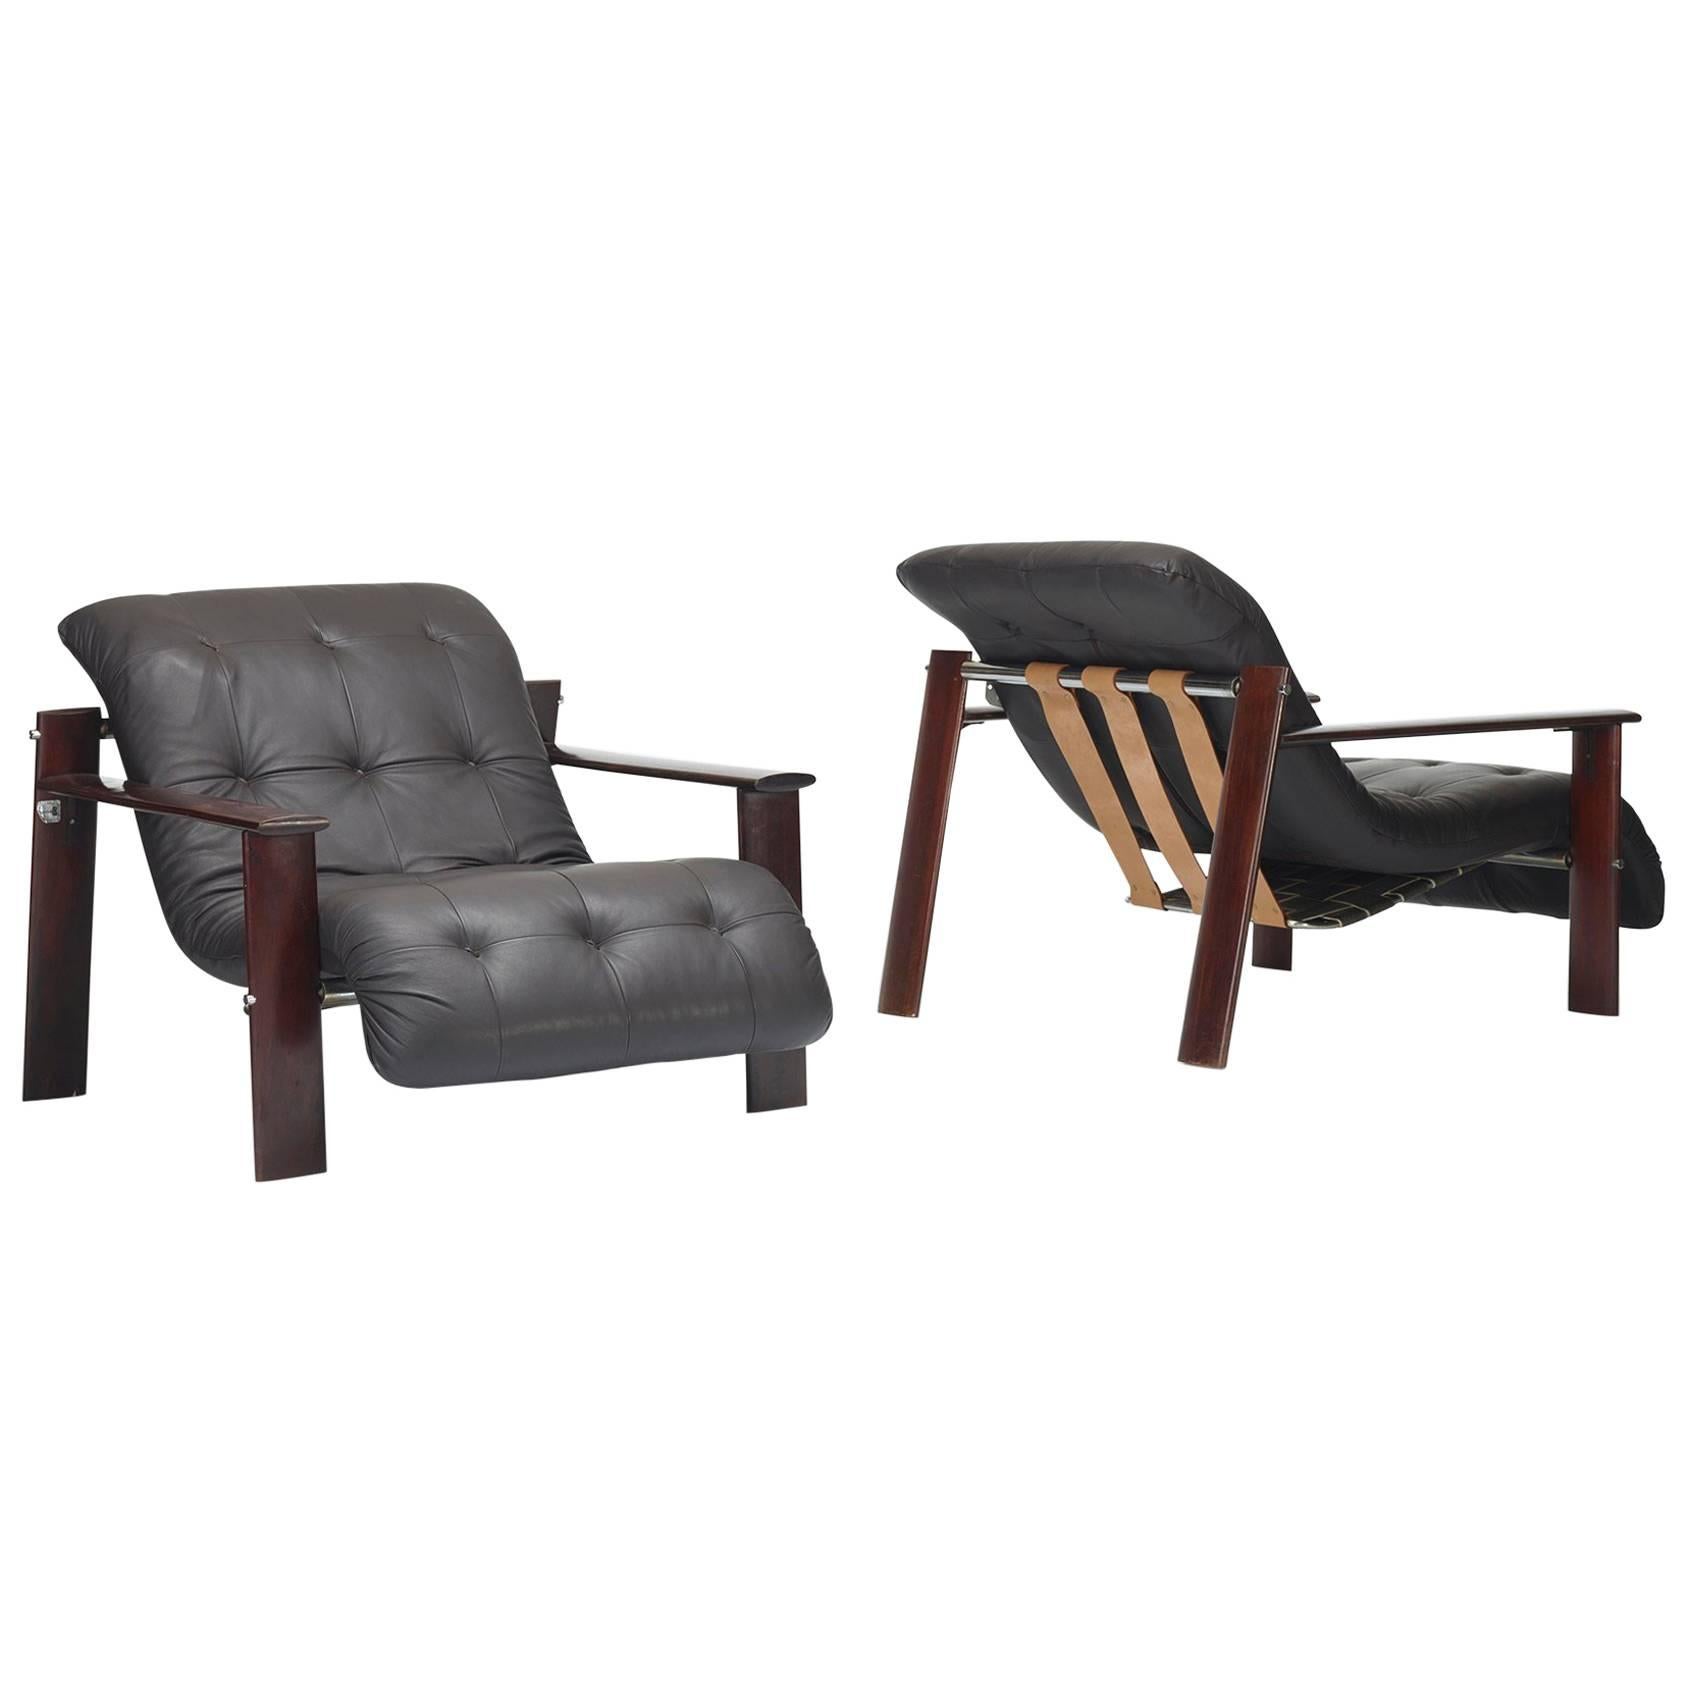 Pair of Lounge Chairs by Percival Lafer for Lafer S.A. Ind. Com